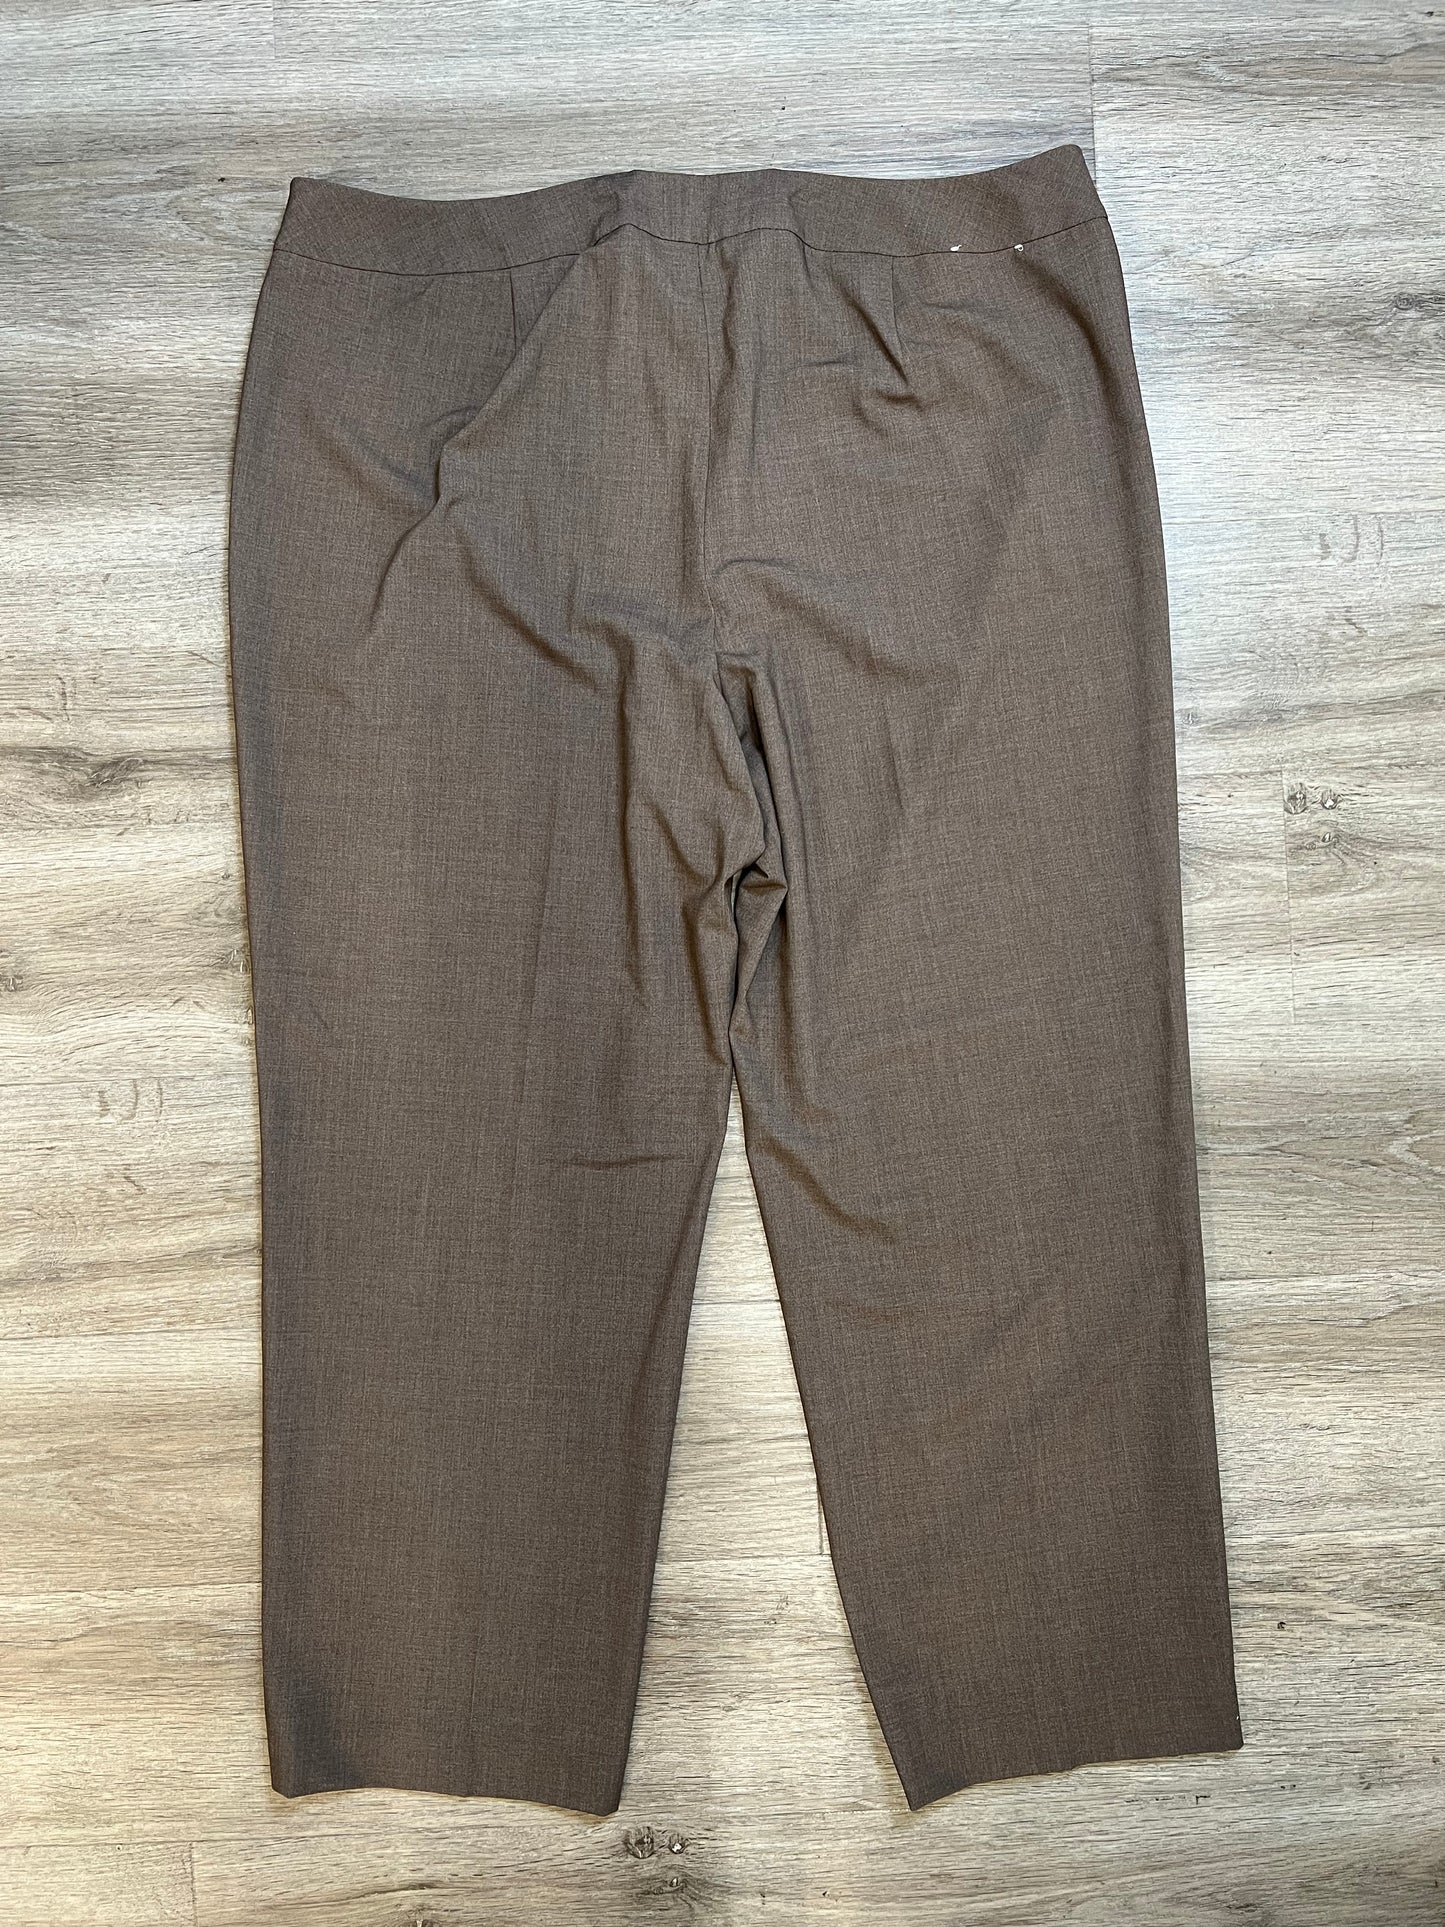 Pants Ankle By Calvin Klein  Size: 3x